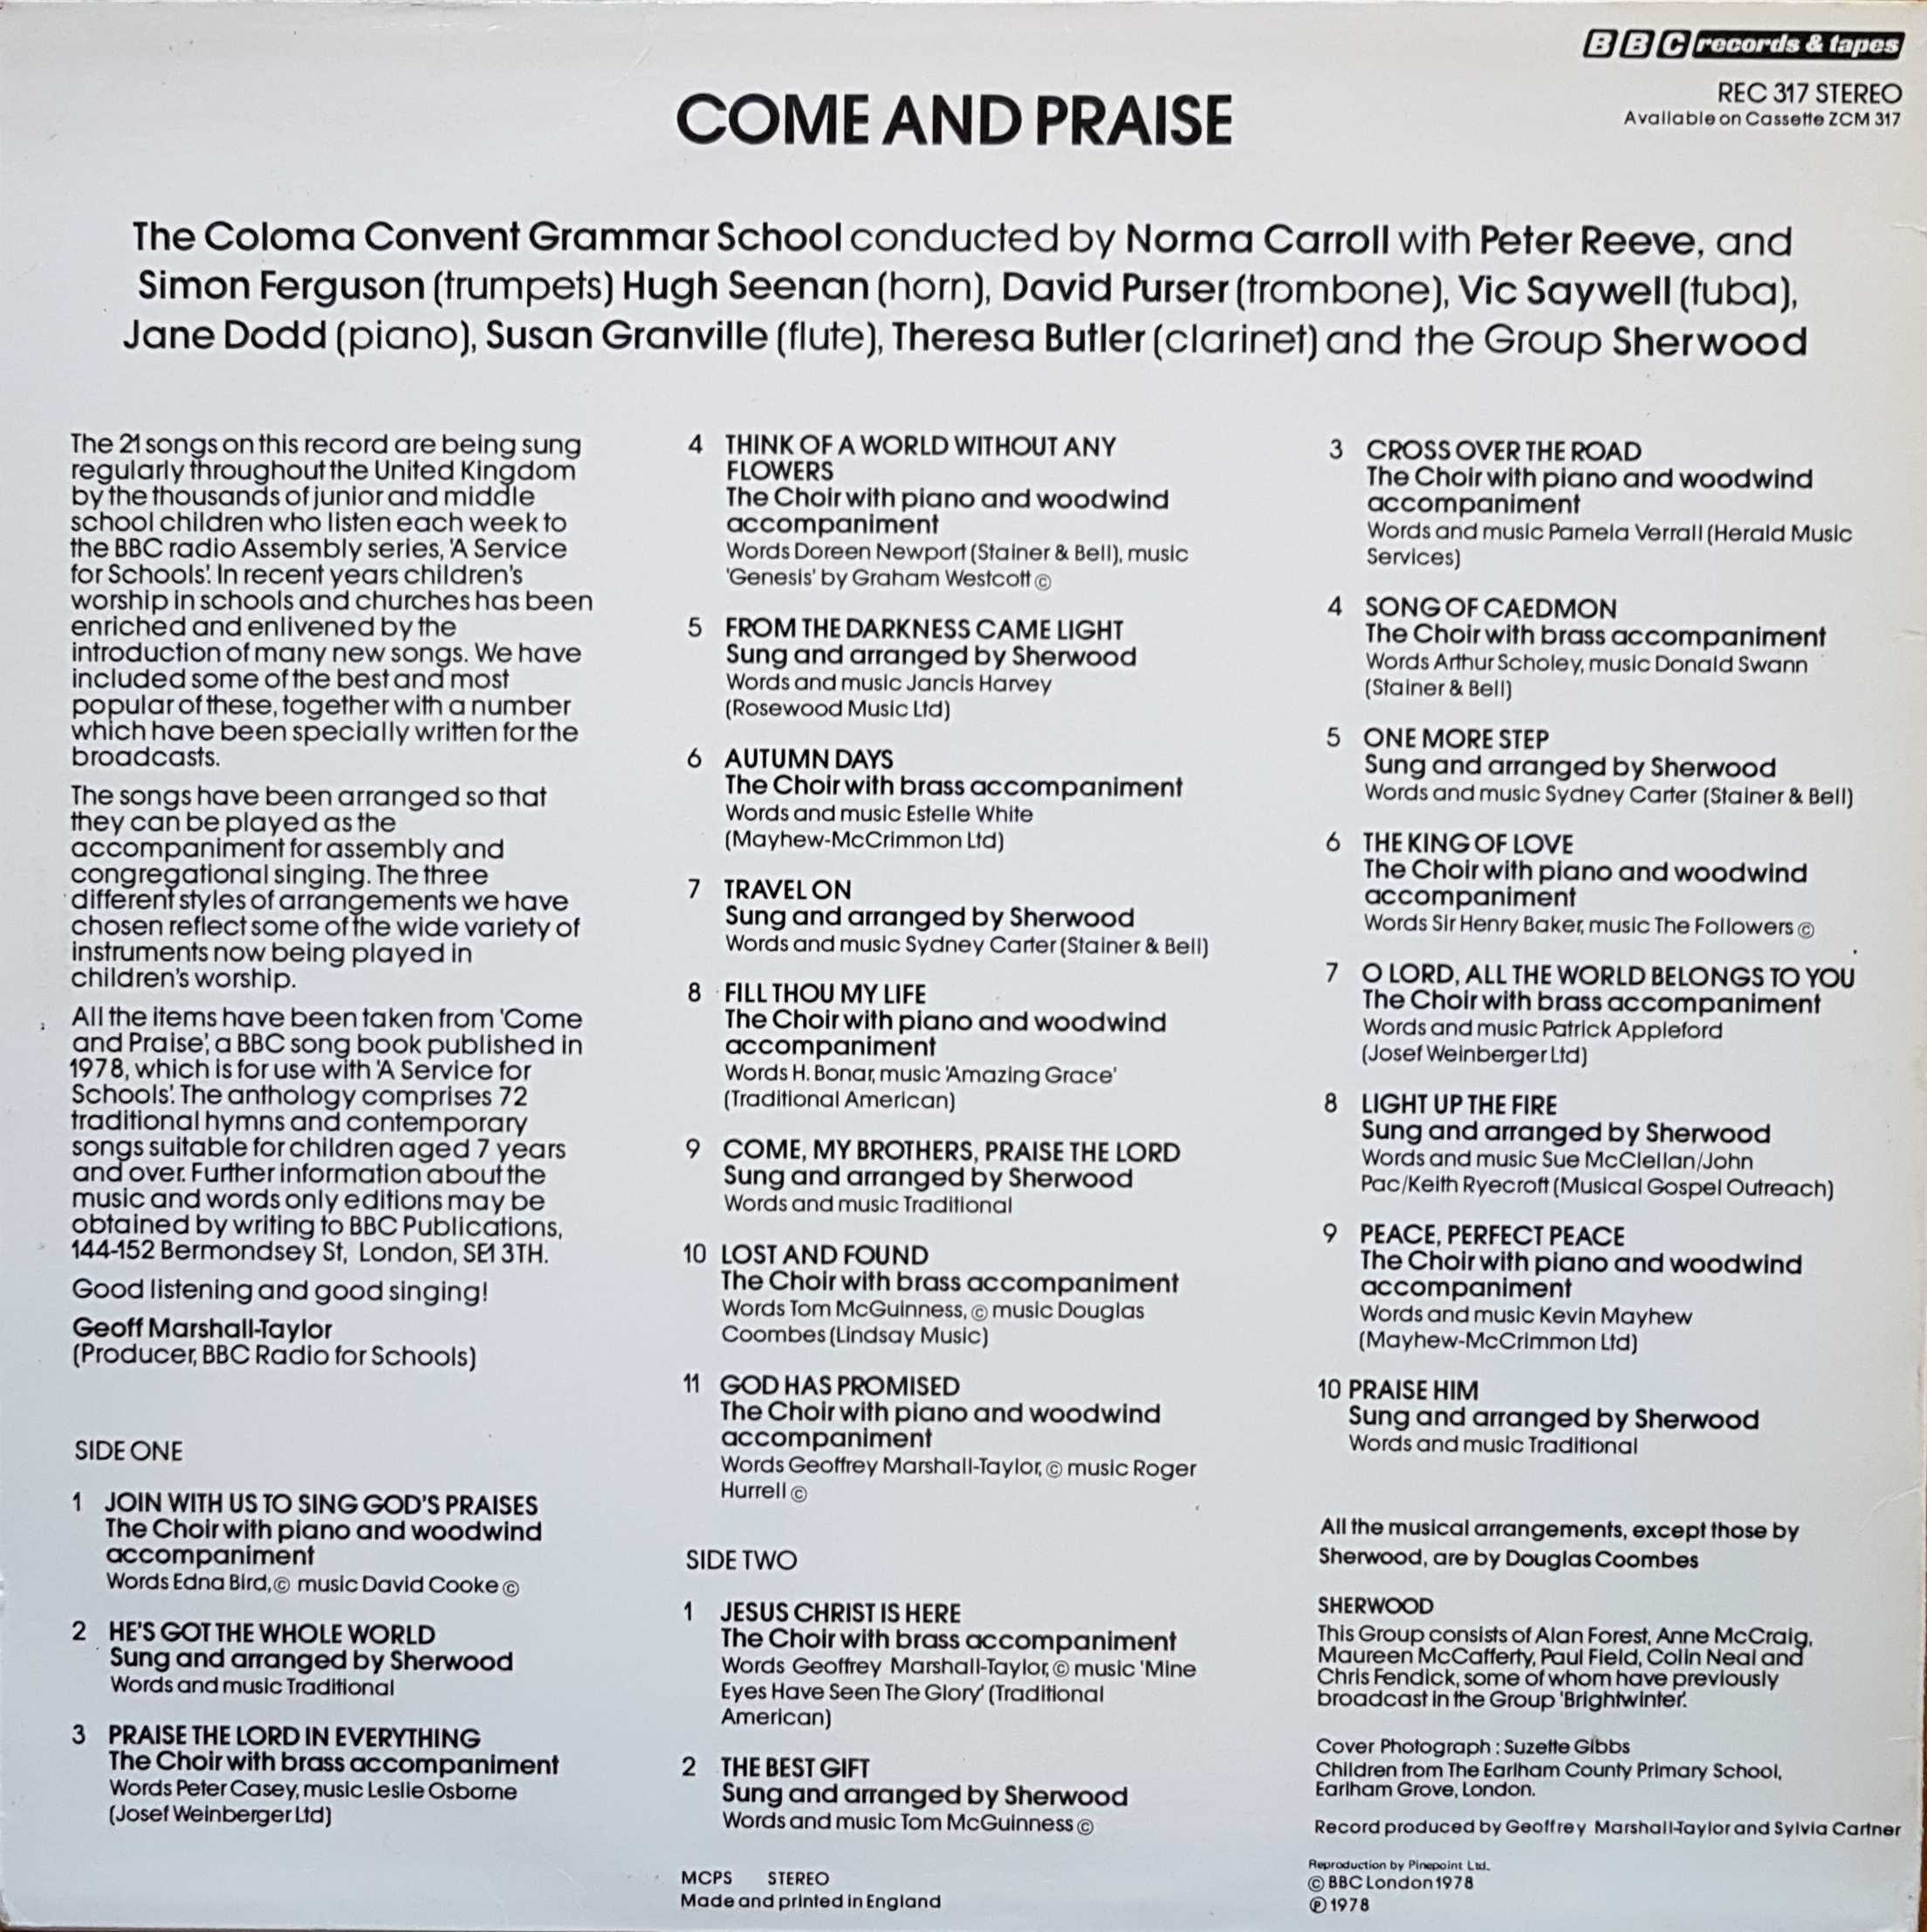 Picture of REC 317 Come & praise: 21 songs for assembly by artist Various from the BBC records and Tapes library